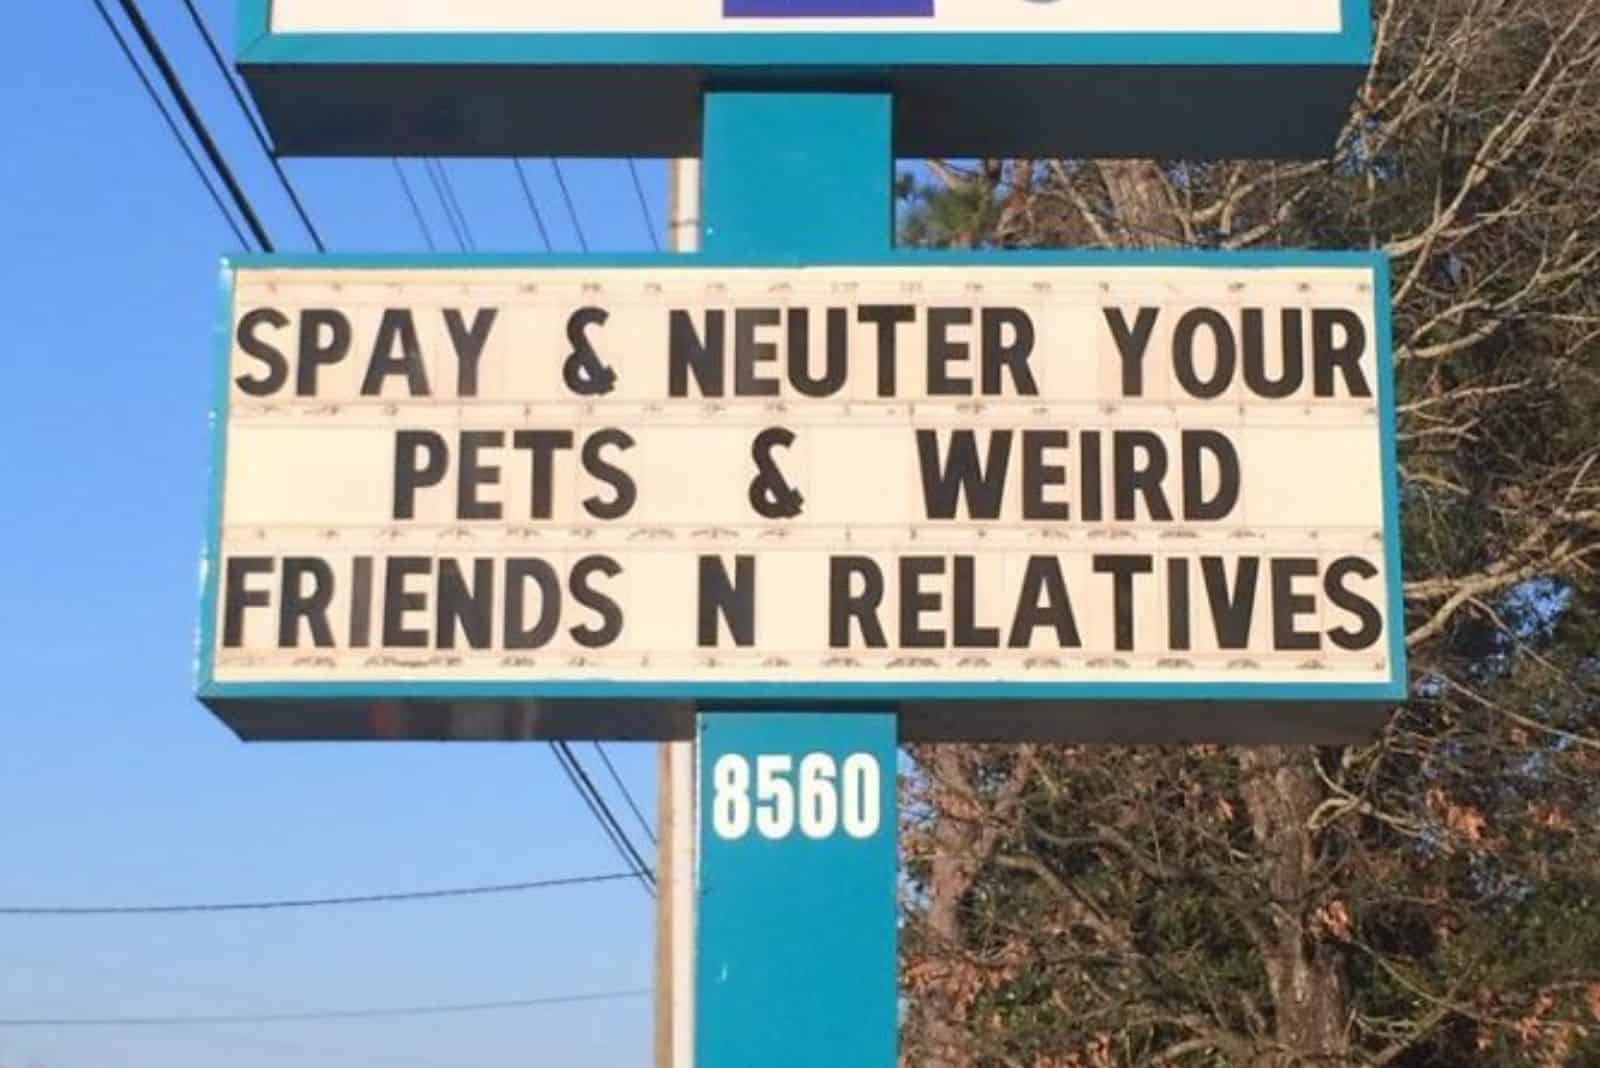 funny vet clinic sign about neutering